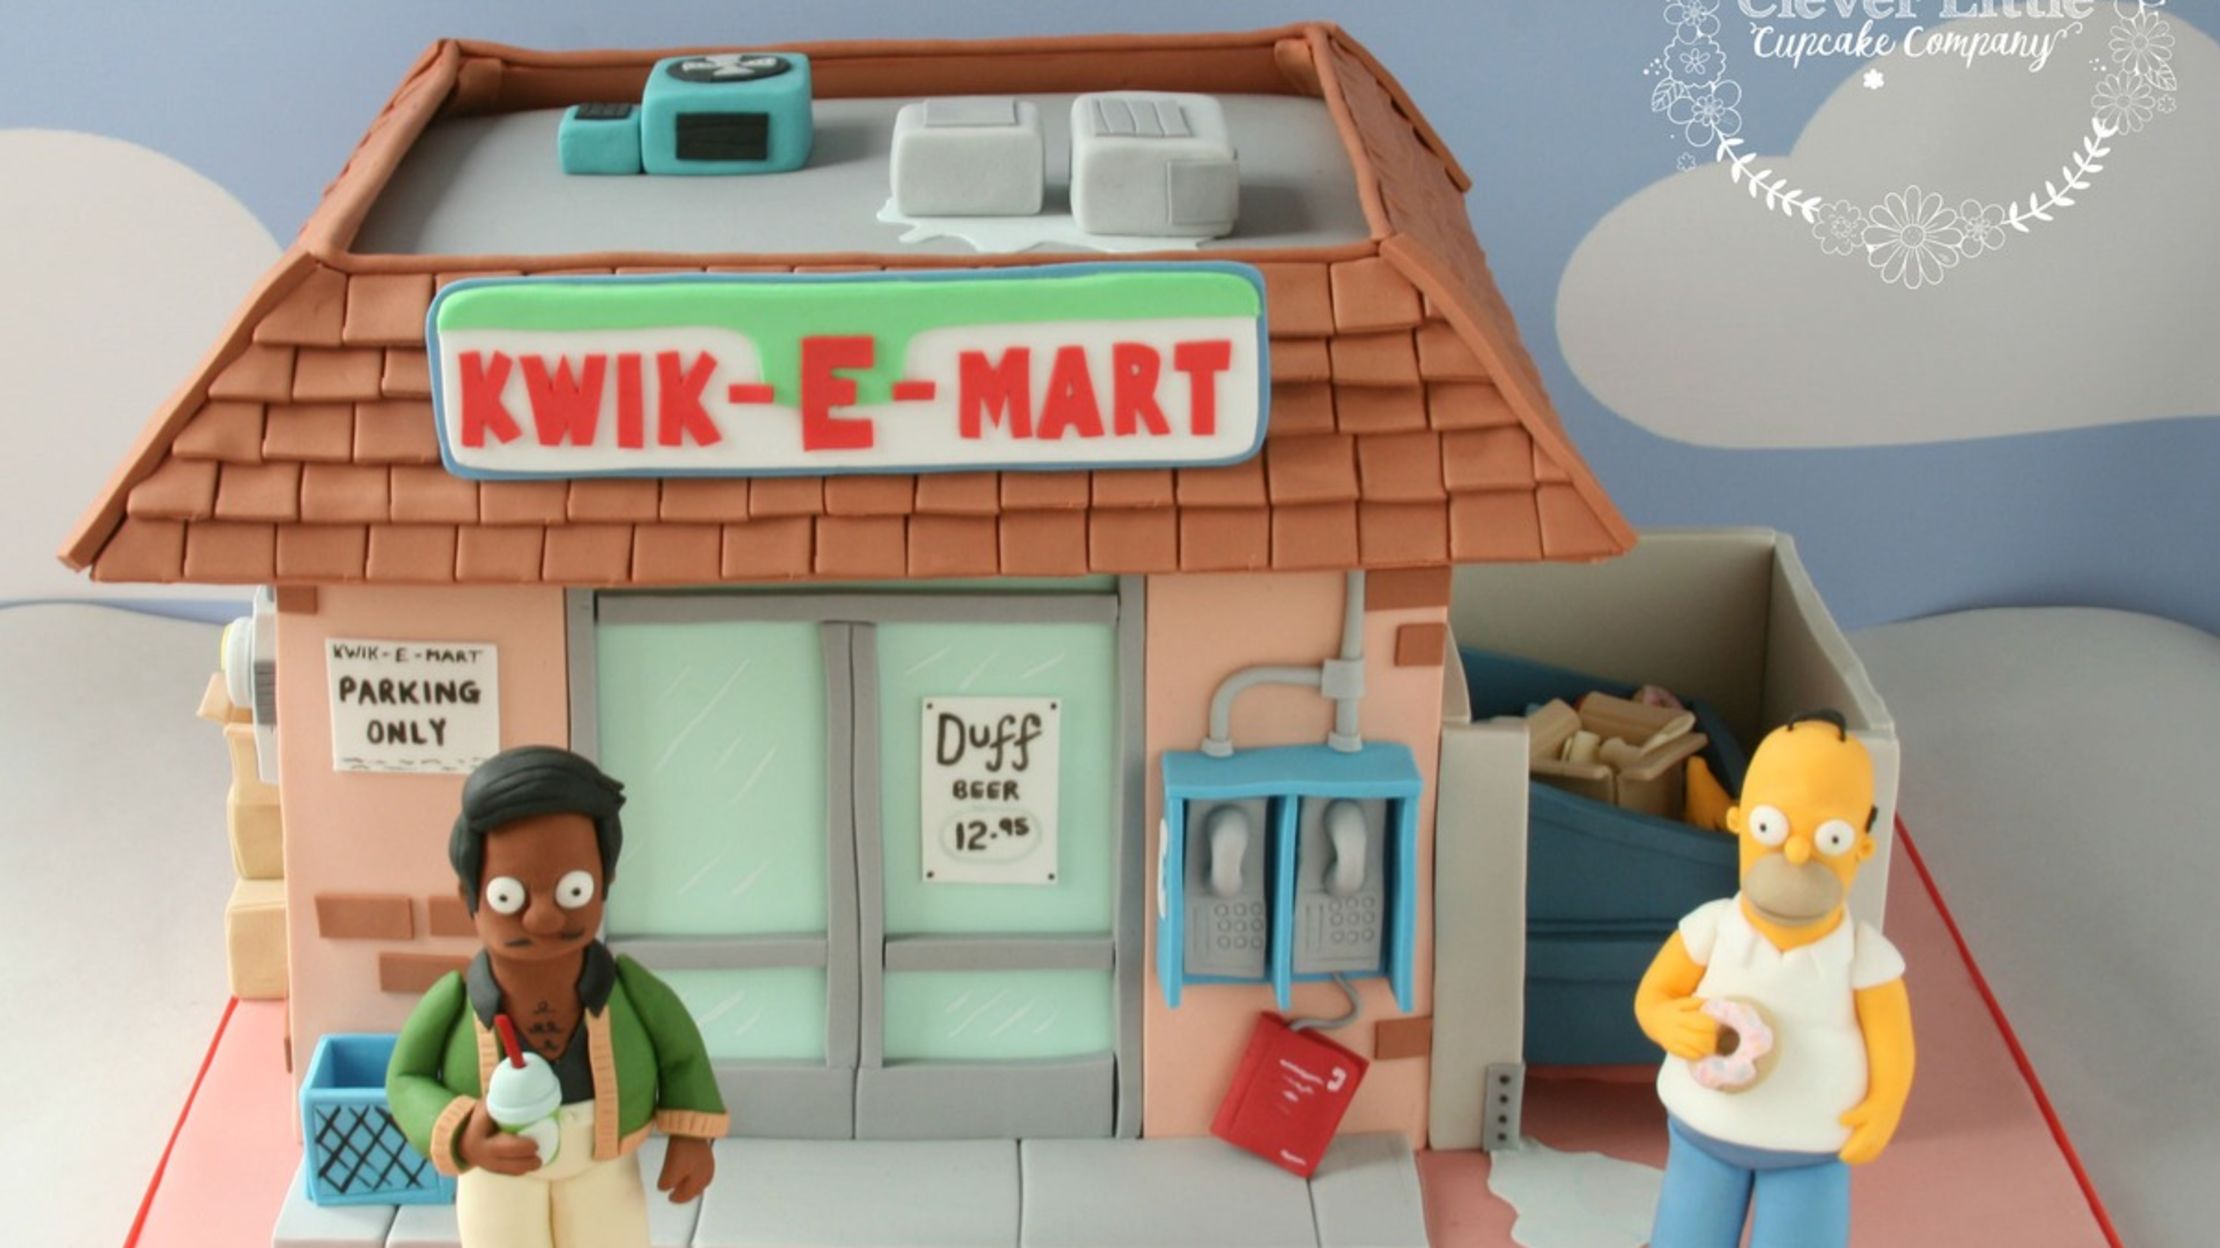 This em Simpsons/em-Themed Kwik-E-Mart Cake Is the Perfect Tribute.